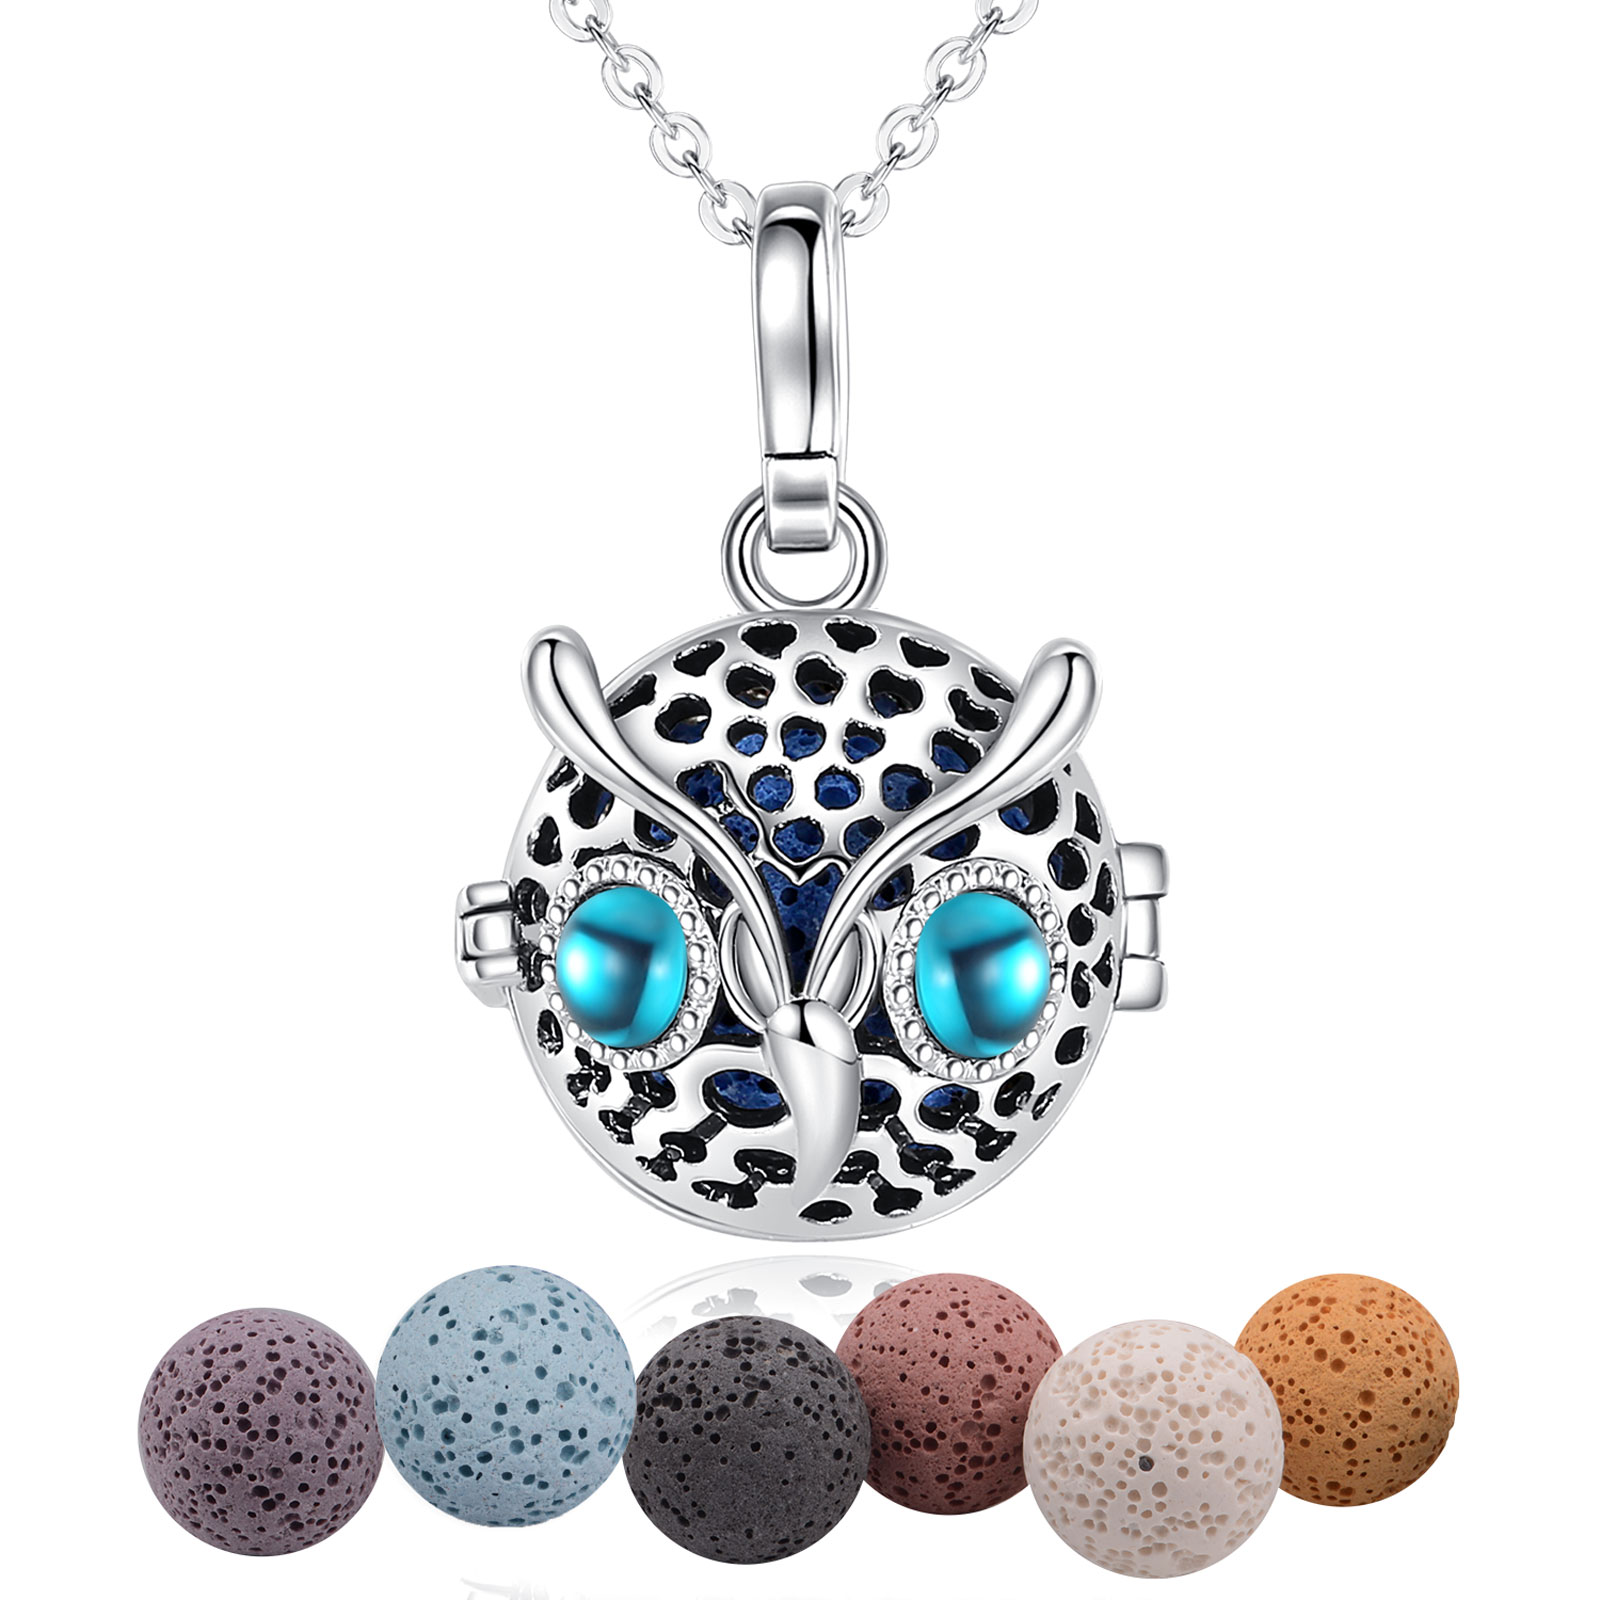 Merryshine Jewelry S925 Sterling Silver Owl Shaped Cage Lava Stone Aromatherapy Necklace for Women